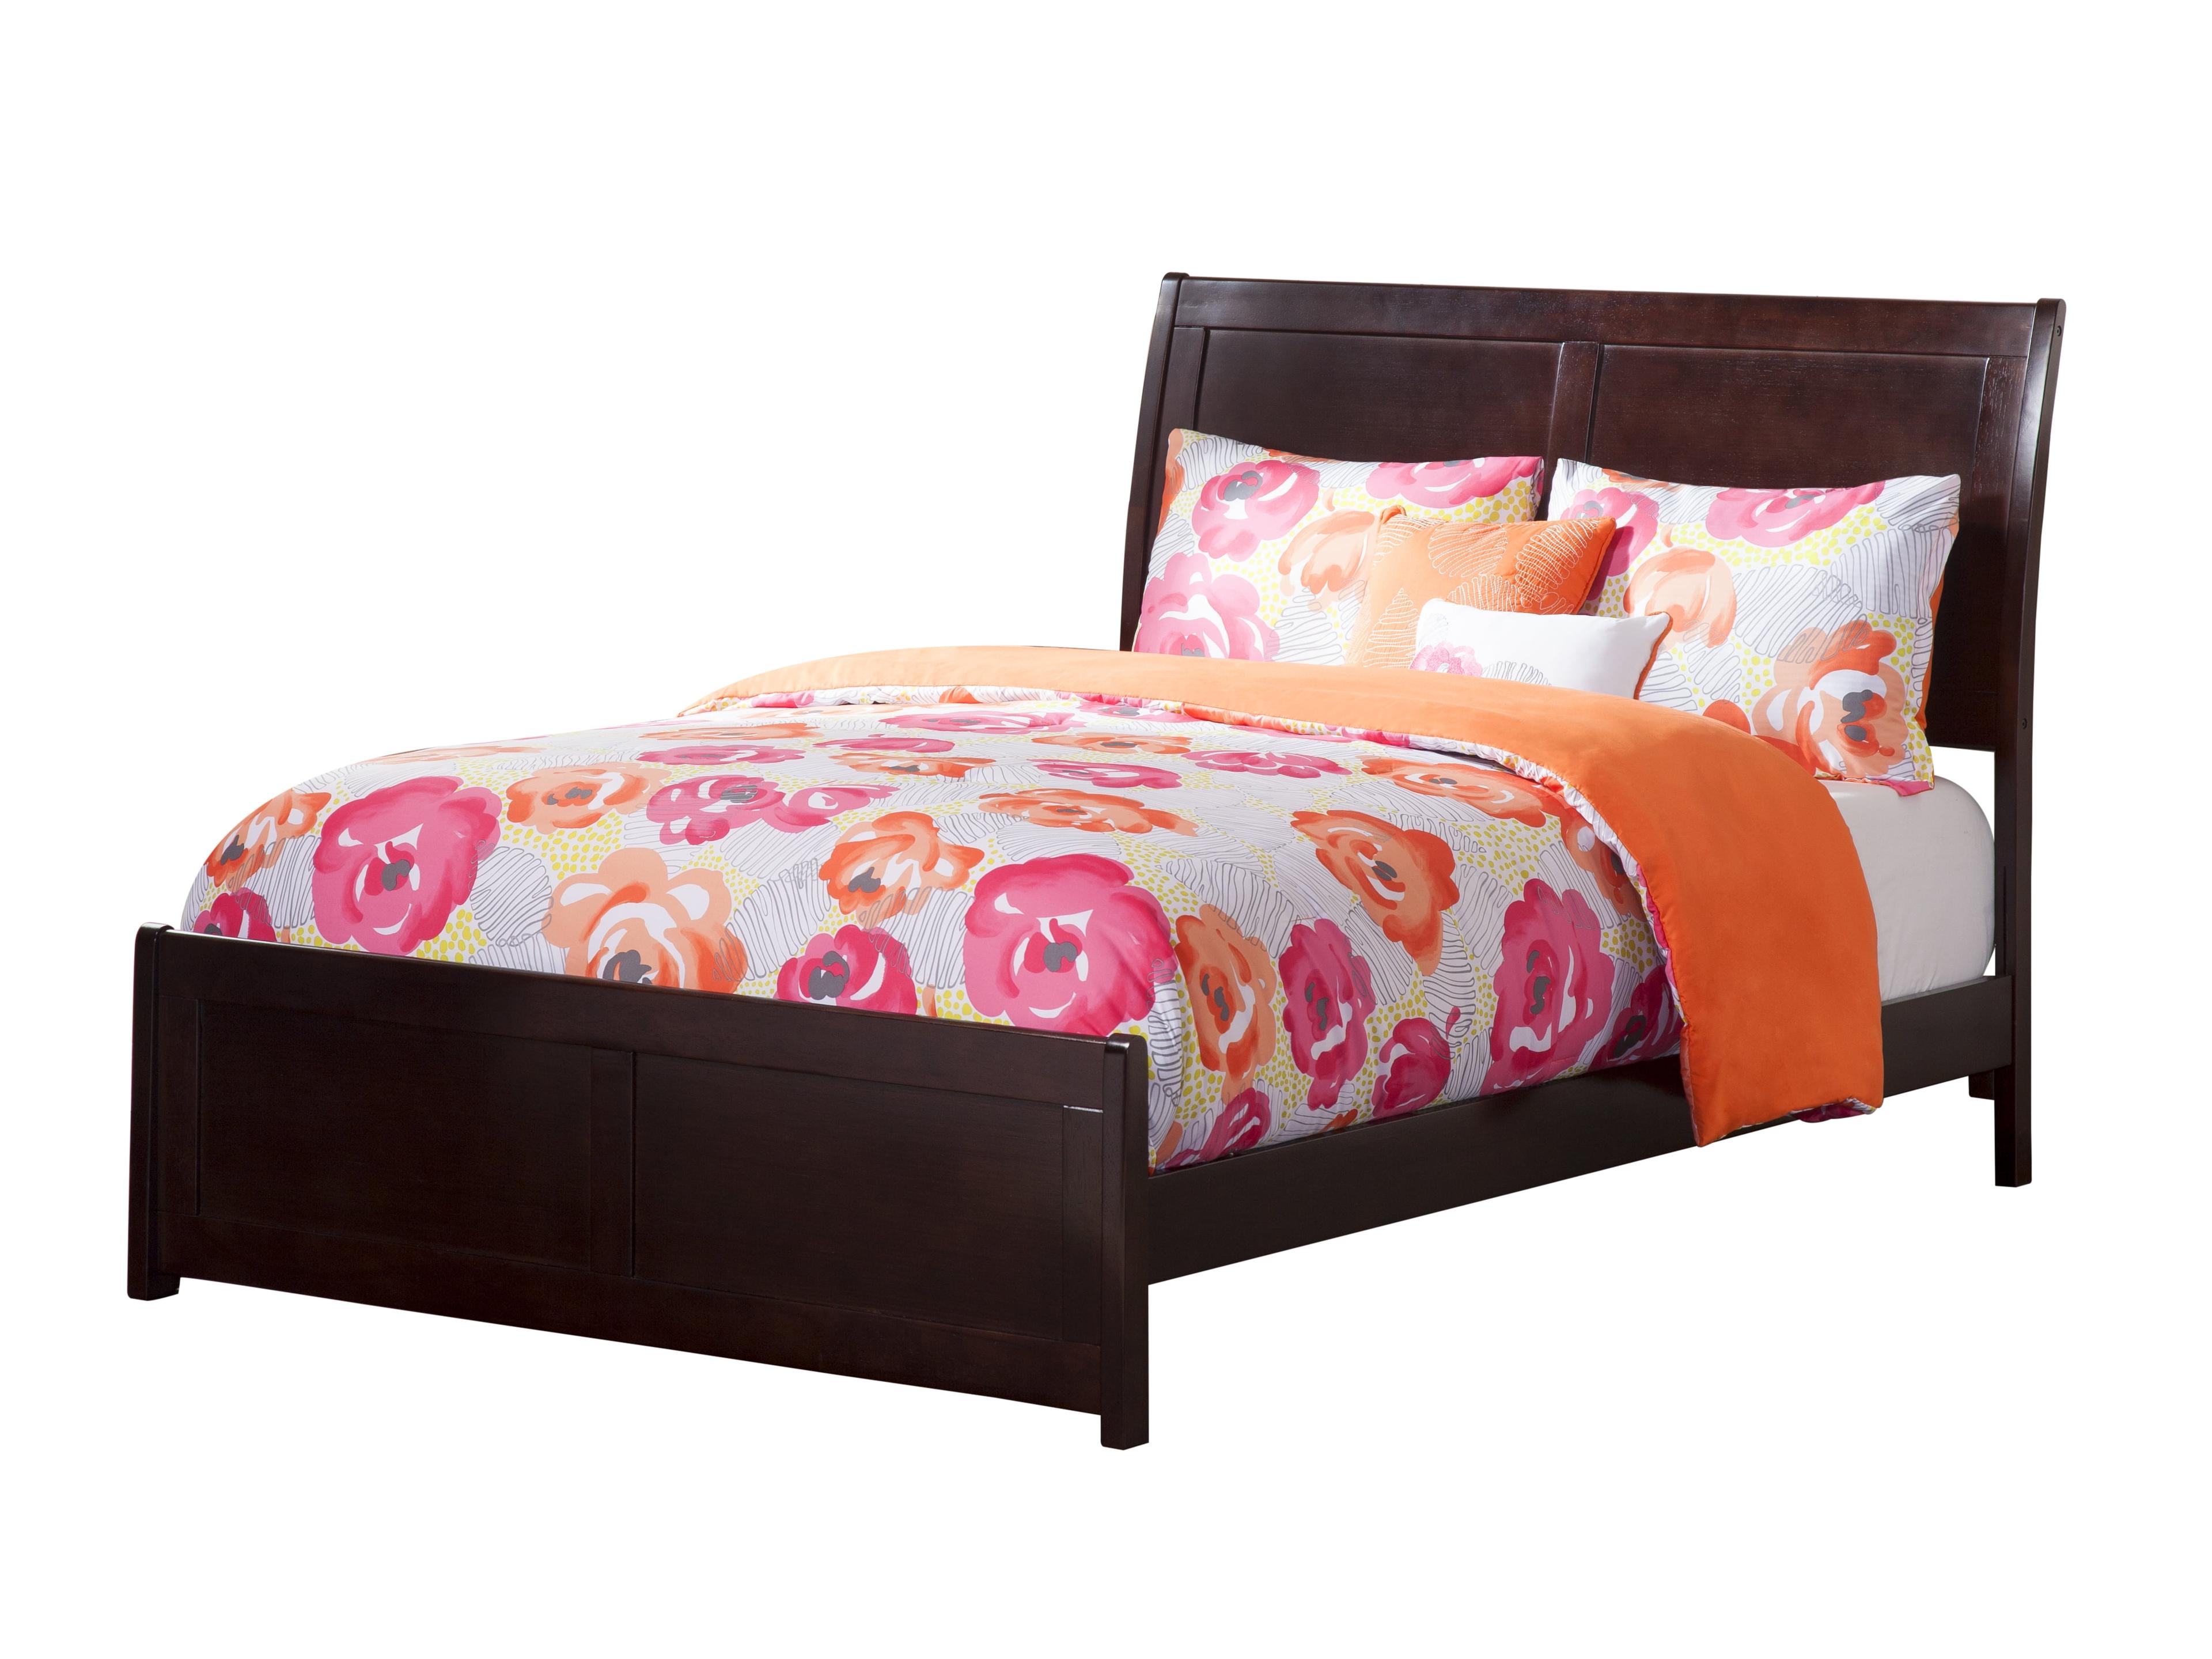 Portland Espresso Full-Size Sleigh Bed with Storage Drawers